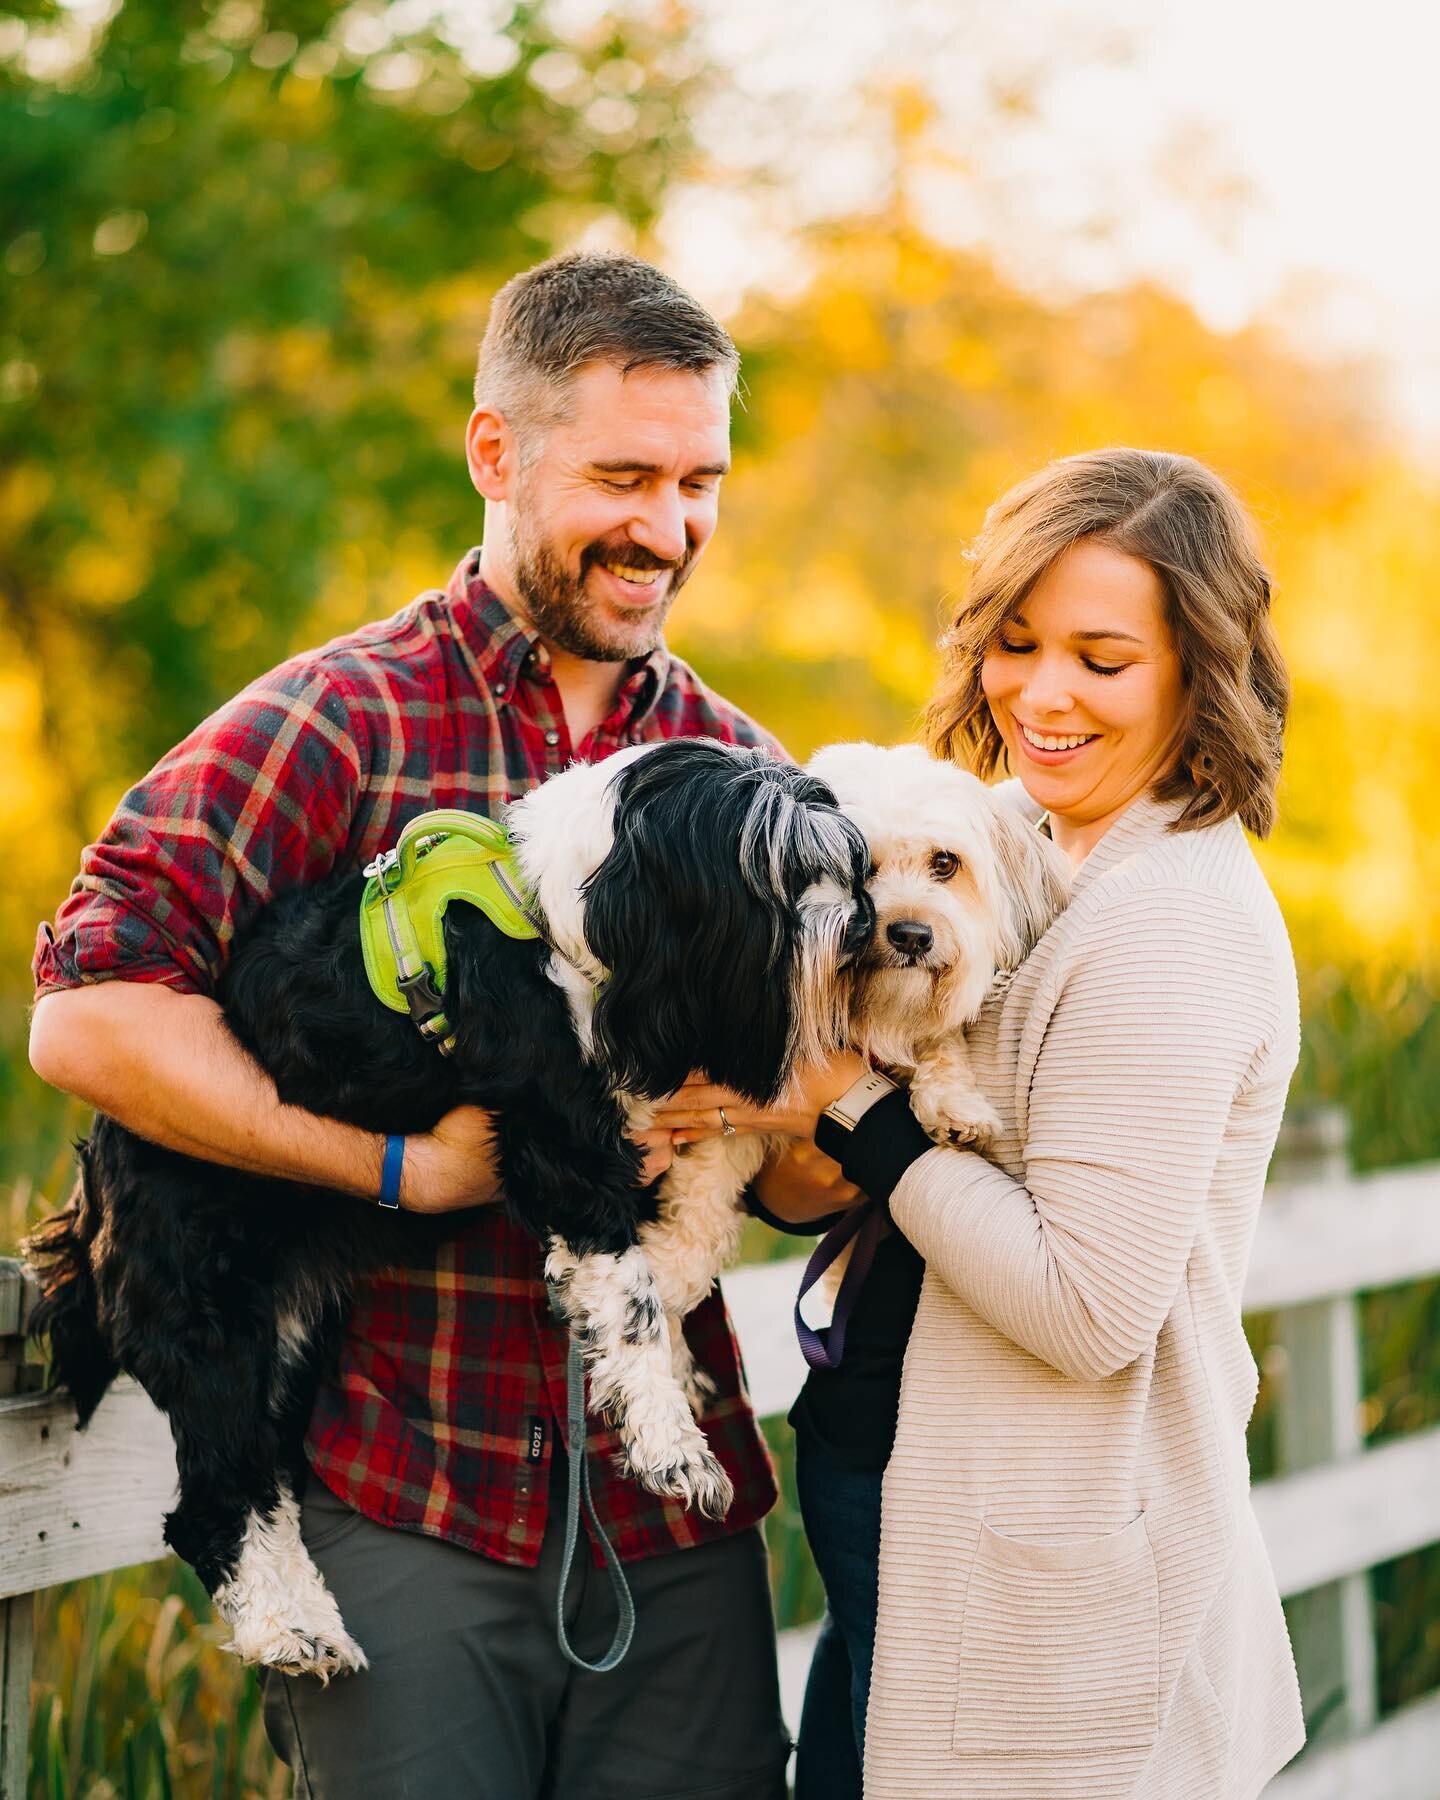 We had the most perfect fall evening for Jeanette &amp; Jake&rsquo;s engagement session! 😍 Their pups Sandy &amp; Nissa joined us for the first half and were such good little models 🥹

I love their easygoing, lighthearted energy! The fun they have 